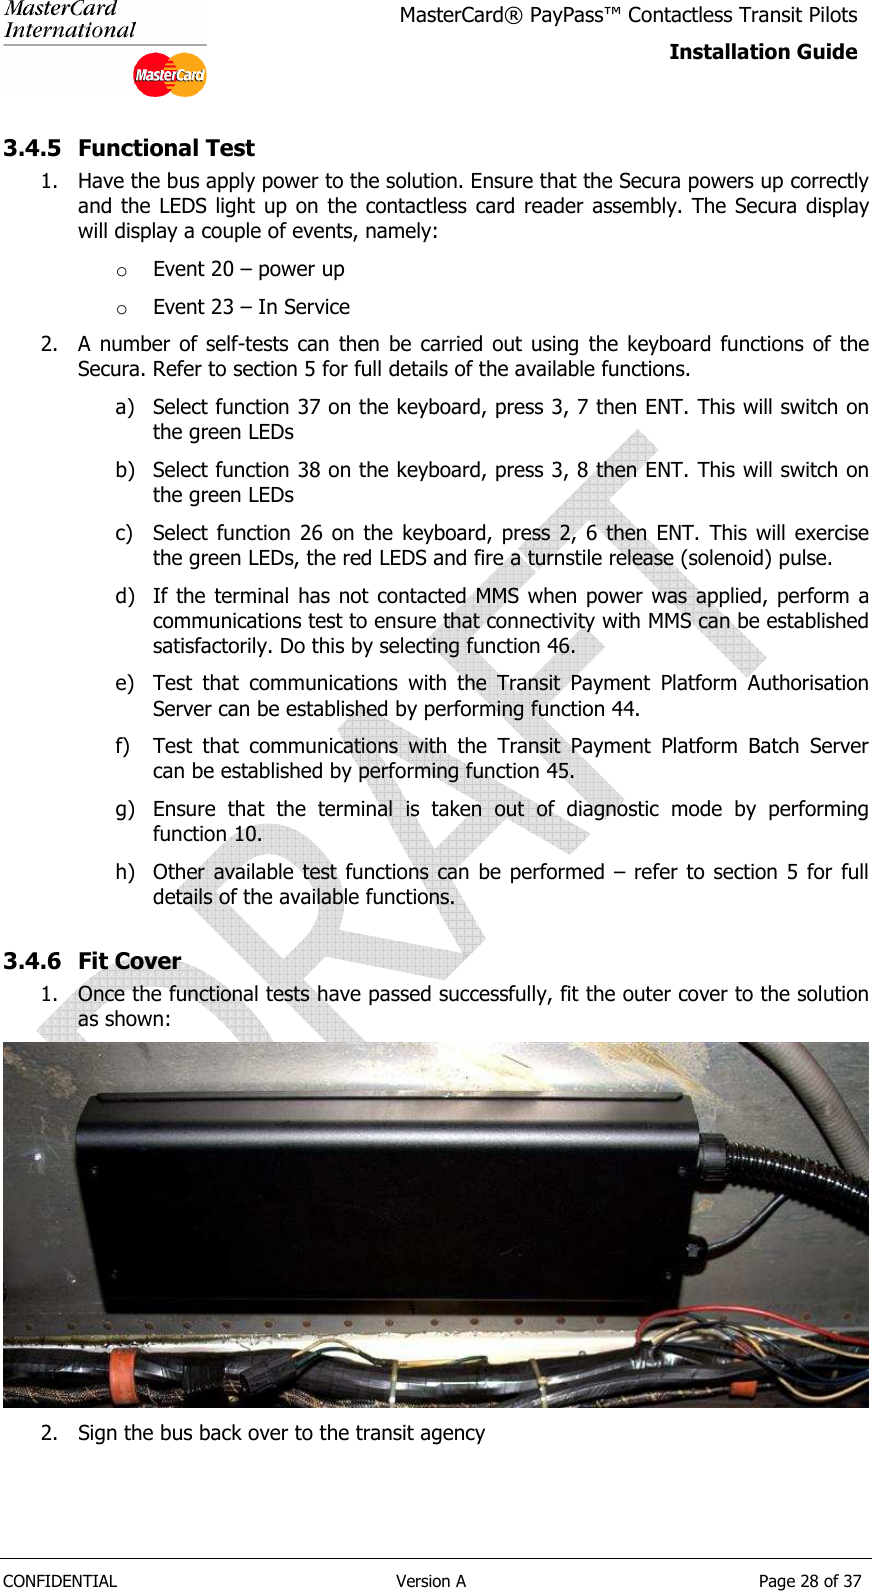   CONFIDENTIAL  Version A  Page 28 of 37 MasterCard® PayPass™ Contactless Transit Pilots Installation Guide  3.4.5 Functional Test 1. Have the bus apply power to the solution. Ensure that the Secura powers up correctly and the LEDS light up on the contactless  card  reader  assembly. The Secura  display will display a couple of events, namely: o Event 20 – power up o Event 23 – In Service 2. A  number  of  self-tests  can  then  be  carried  out  using  the  keyboard  functions  of  the Secura. Refer to section 5 for full details of the available functions. a) Select function 37 on the keyboard, press 3, 7 then ENT. This will switch on the green LEDs b) Select function 38 on the keyboard, press 3, 8 then ENT. This will switch on the green LEDs c) Select  function  26  on  the  keyboard,  press  2,  6  then  ENT.  This  will  exercise the green LEDs, the red LEDS and fire a turnstile release (solenoid) pulse. d) If the terminal has not contacted MMS when power was applied, perform a communications test to ensure that connectivity with MMS can be established satisfactorily. Do this by selecting function 46. e) Test  that  communications  with  the  Transit  Payment  Platform  Authorisation Server can be established by performing function 44. f) Test  that  communications  with  the  Transit  Payment  Platform  Batch  Server can be established by performing function 45. g) Ensure  that  the  terminal  is  taken  out  of  diagnostic  mode  by  performing function 10. h) Other available  test  functions can be performed  – refer to section 5 for full details of the available functions. 3.4.6 Fit Cover 1. Once the functional tests have passed successfully, fit the outer cover to the solution as shown:  2. Sign the bus back over to the transit agency 